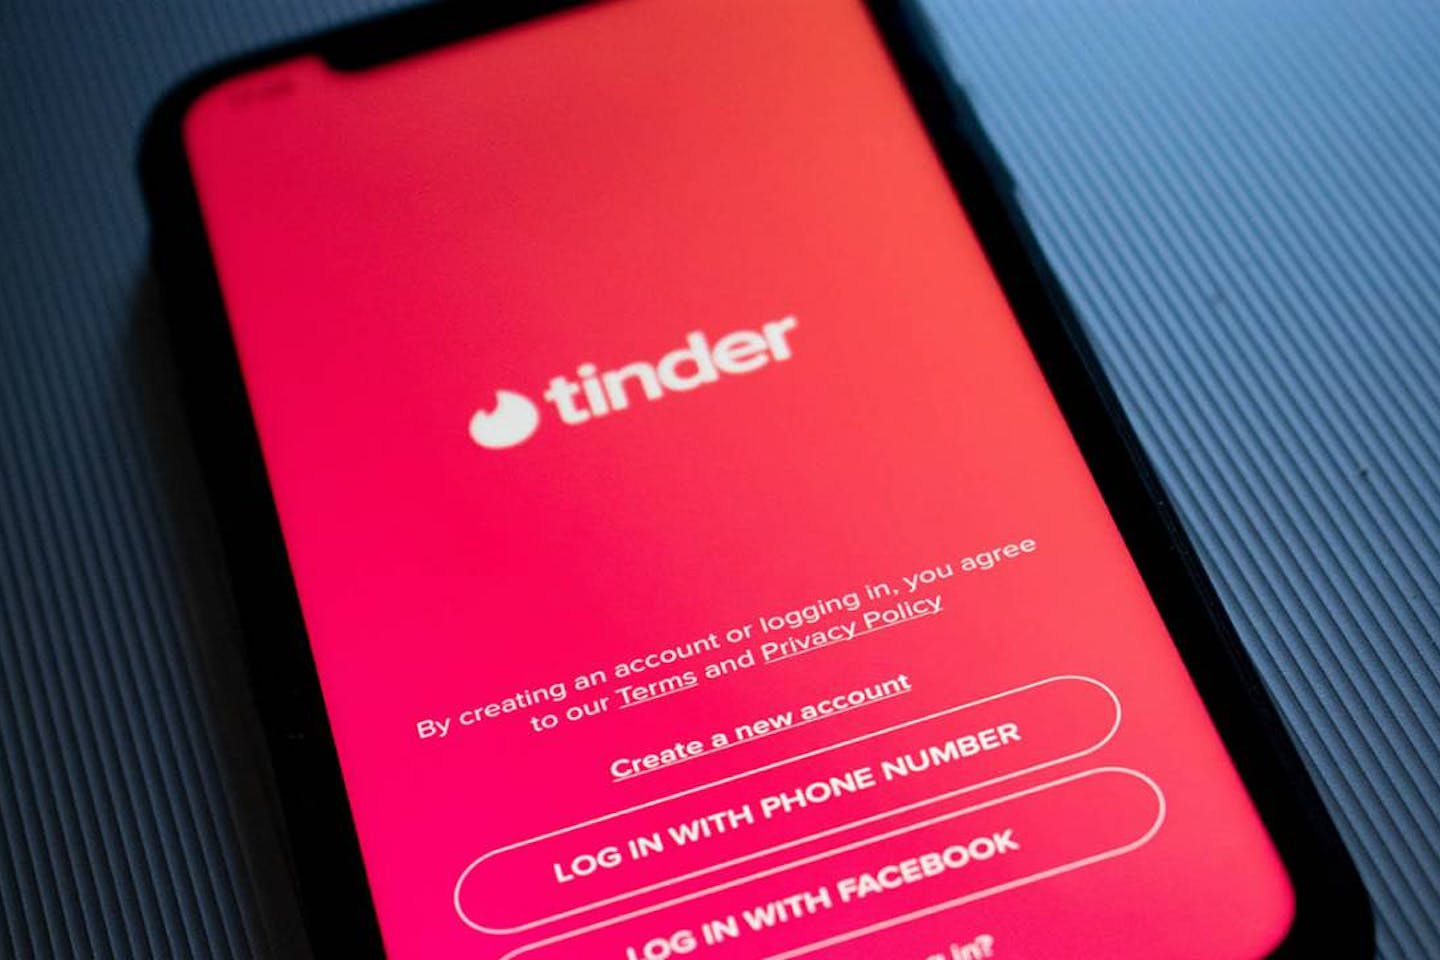 Read tinder view Secure cryptoprocessor